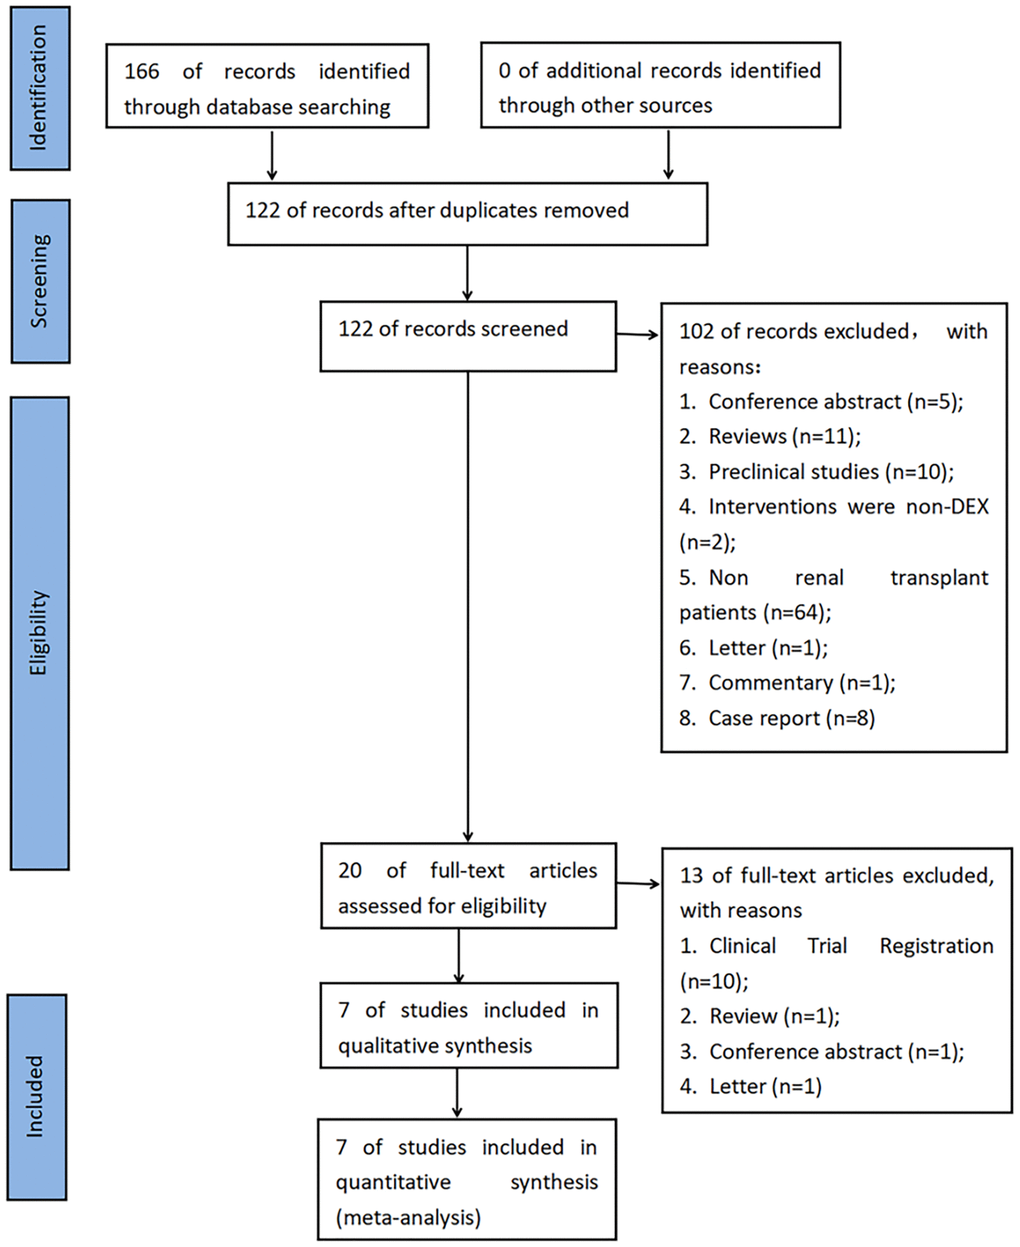 PRISMA flow chart for the systematic review and the meta-analysis of literature retrieval and screening. Abbreviation: DEX: dexmedetomidine.